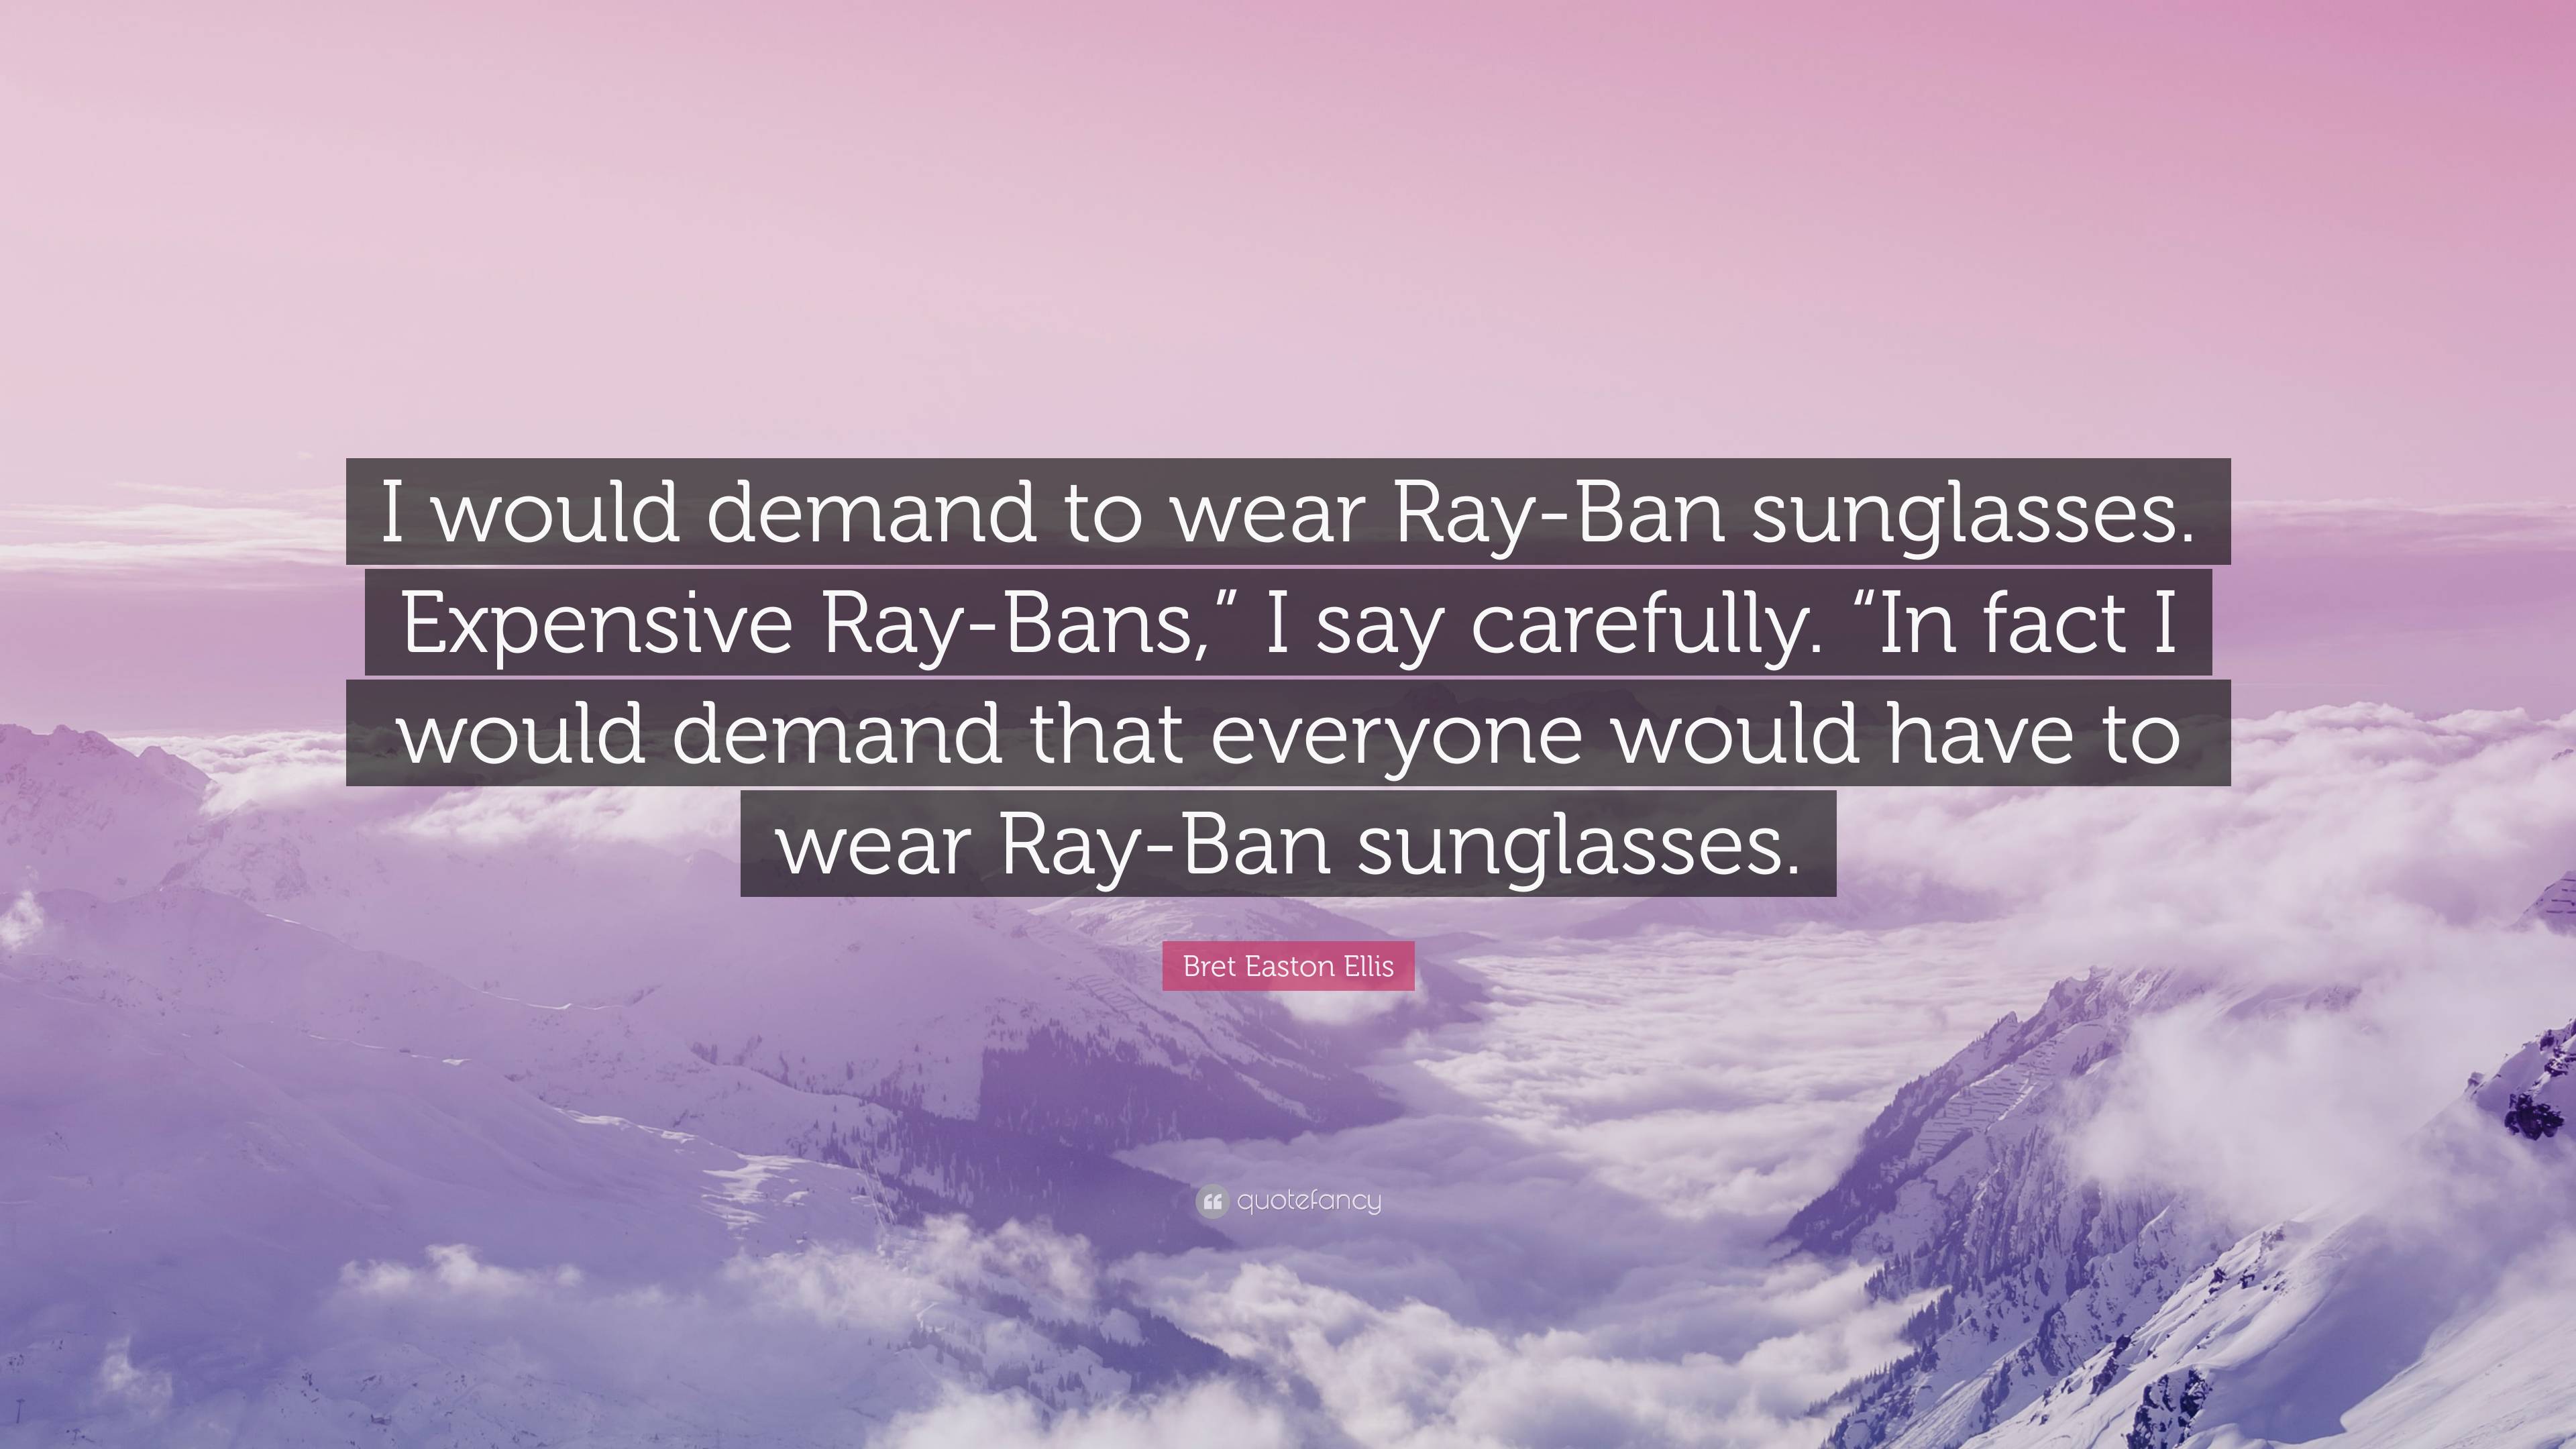 Bret Easton Ellis Quote: “I would demand to wear Ray-Ban sunglasses ...